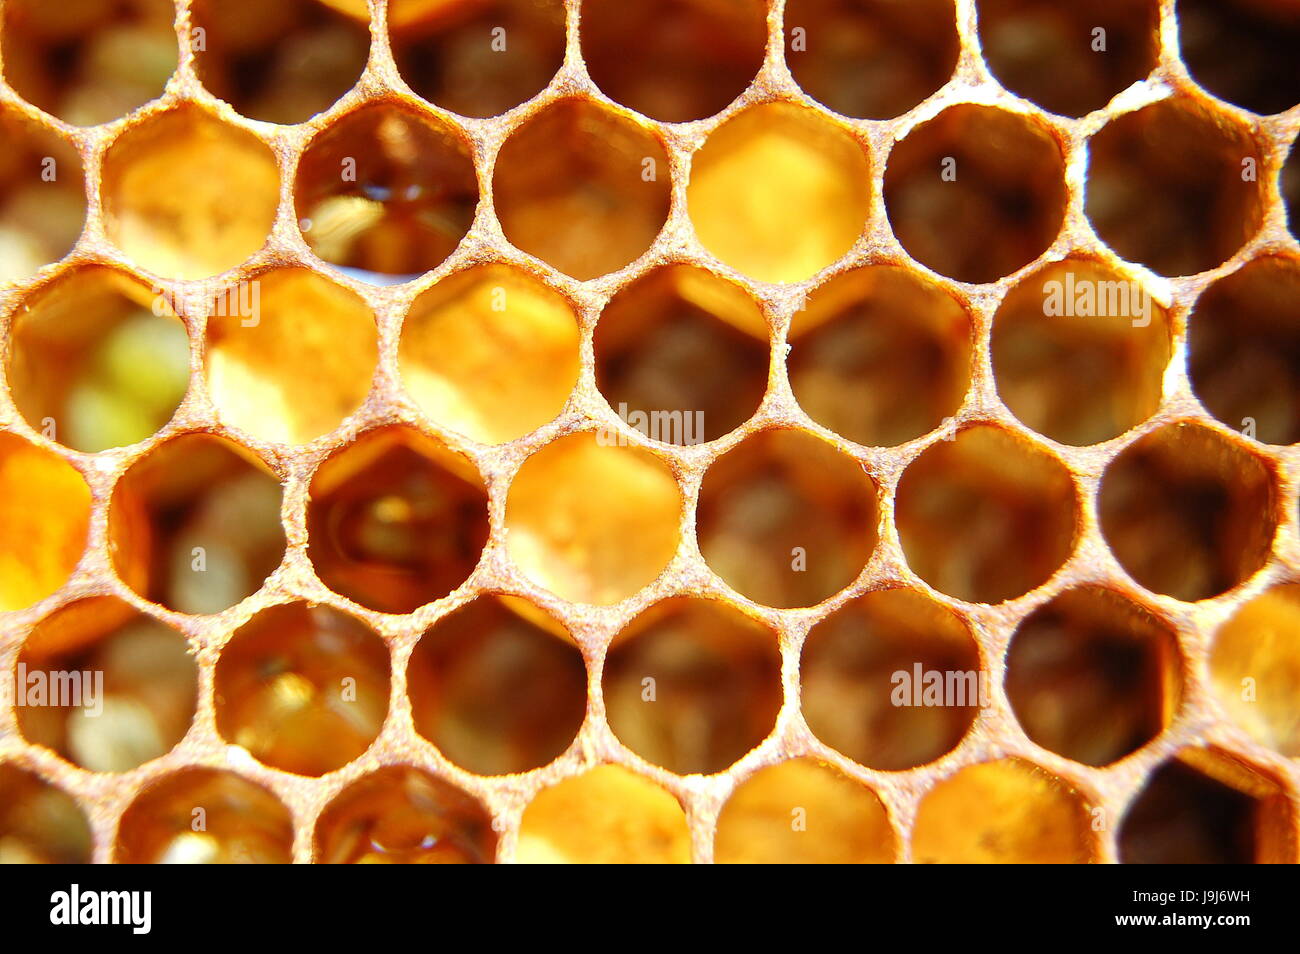 https://c8.alamy.com/comp/J9J6WH/wax-wallpaper-honeycomb-yellow-insect-bee-texture-natural-sweet-J9J6WH.jpg